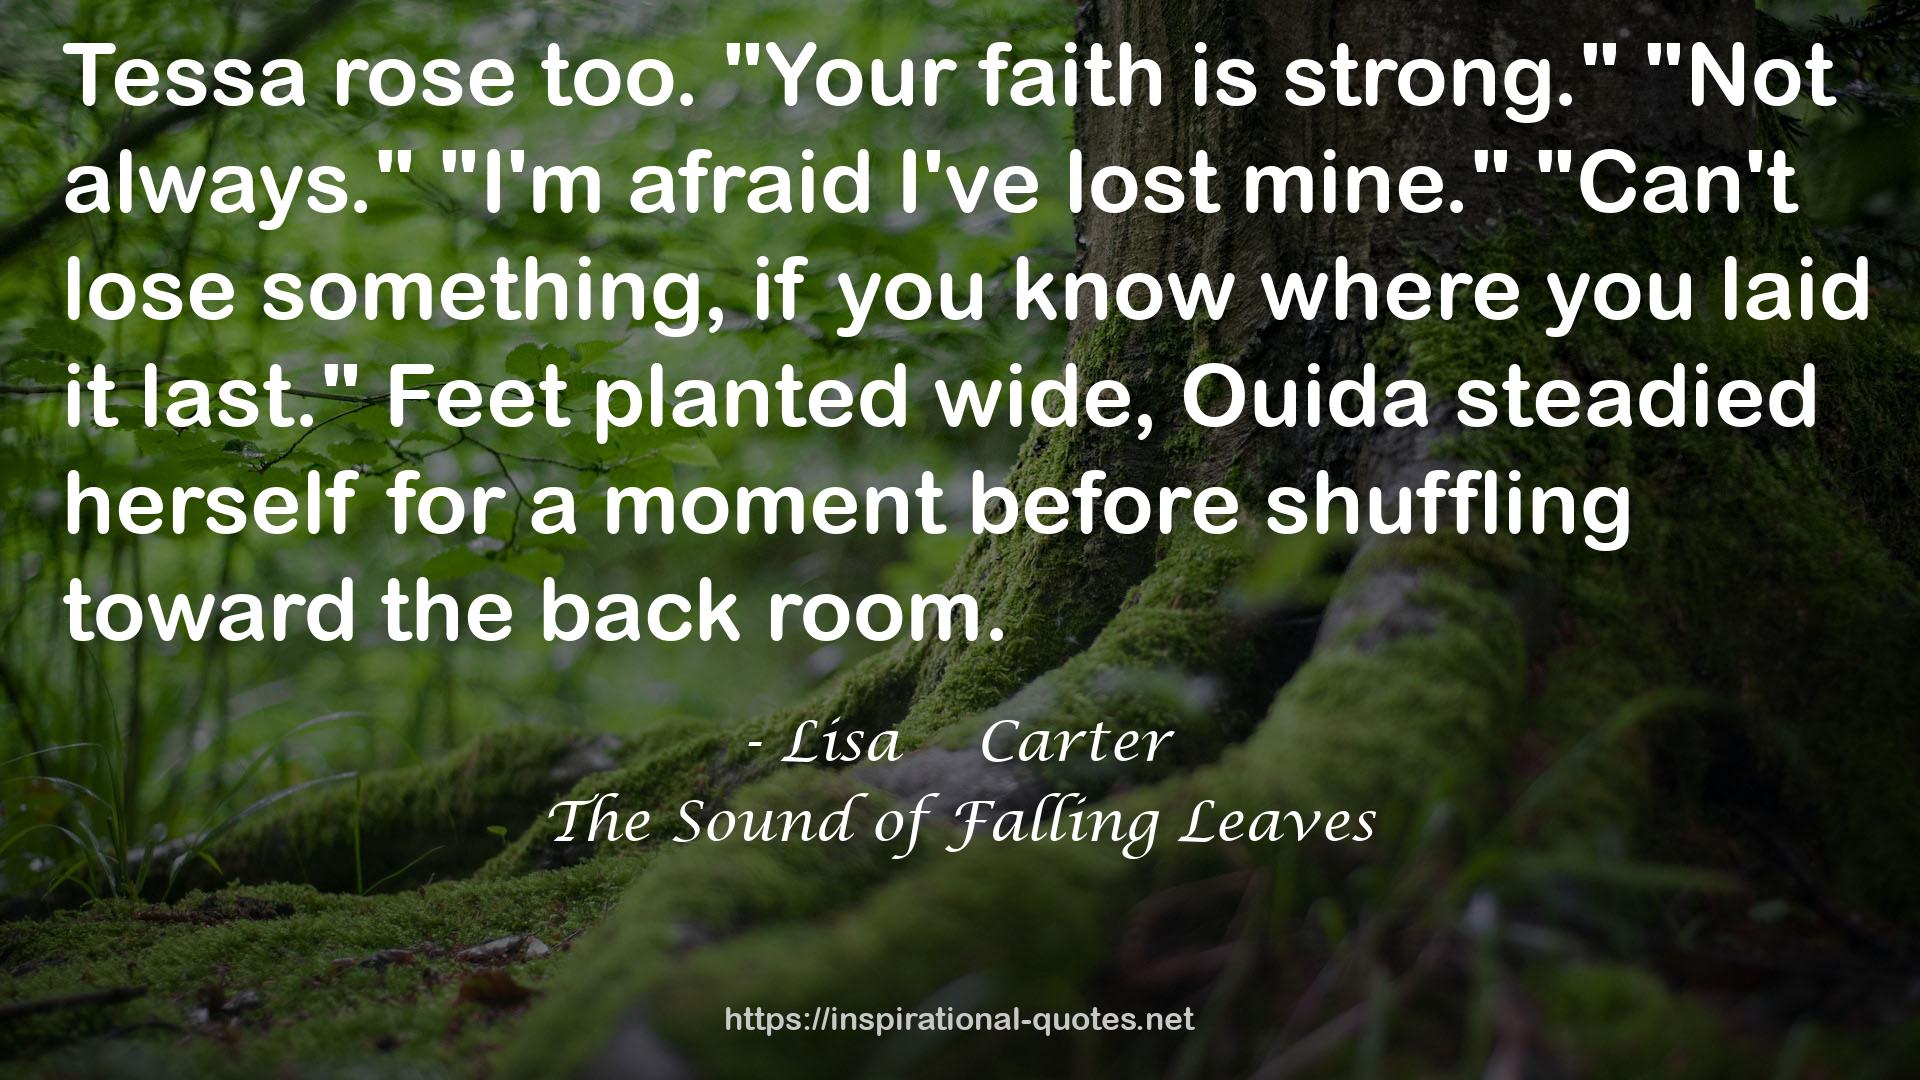 The Sound of Falling Leaves QUOTES